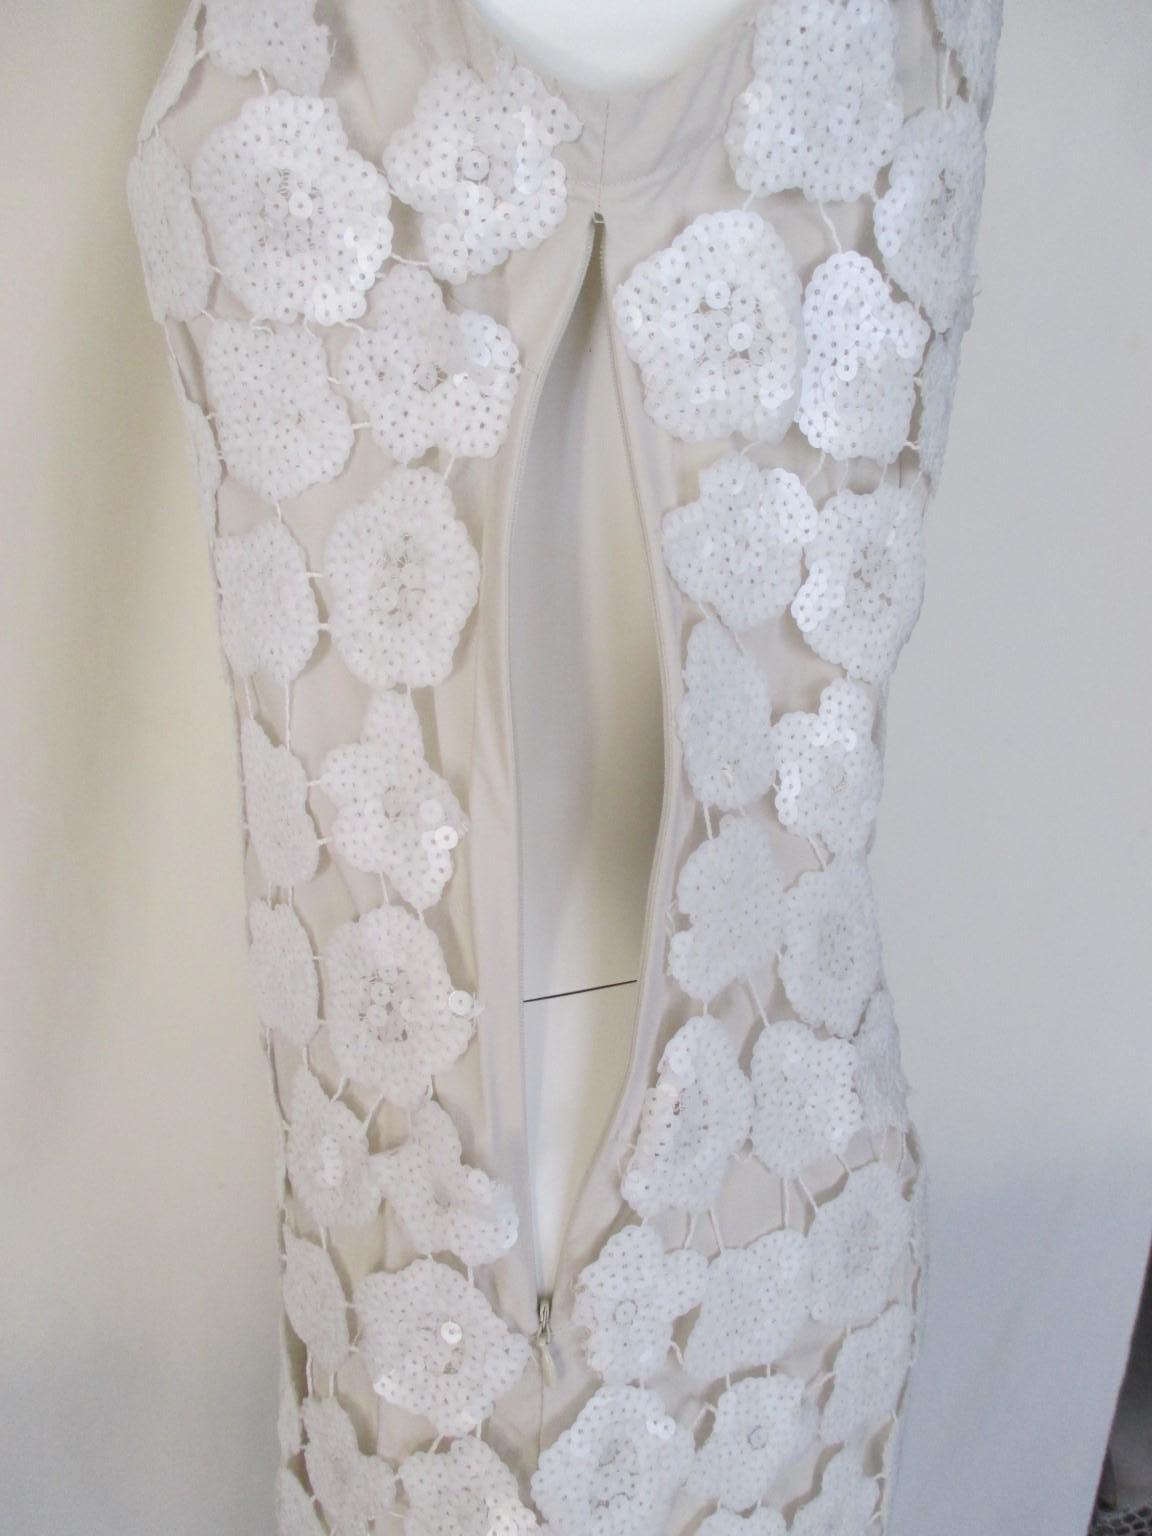  Chloe Sequin Flower Dress In Fair Condition For Sale In Amsterdam, NL